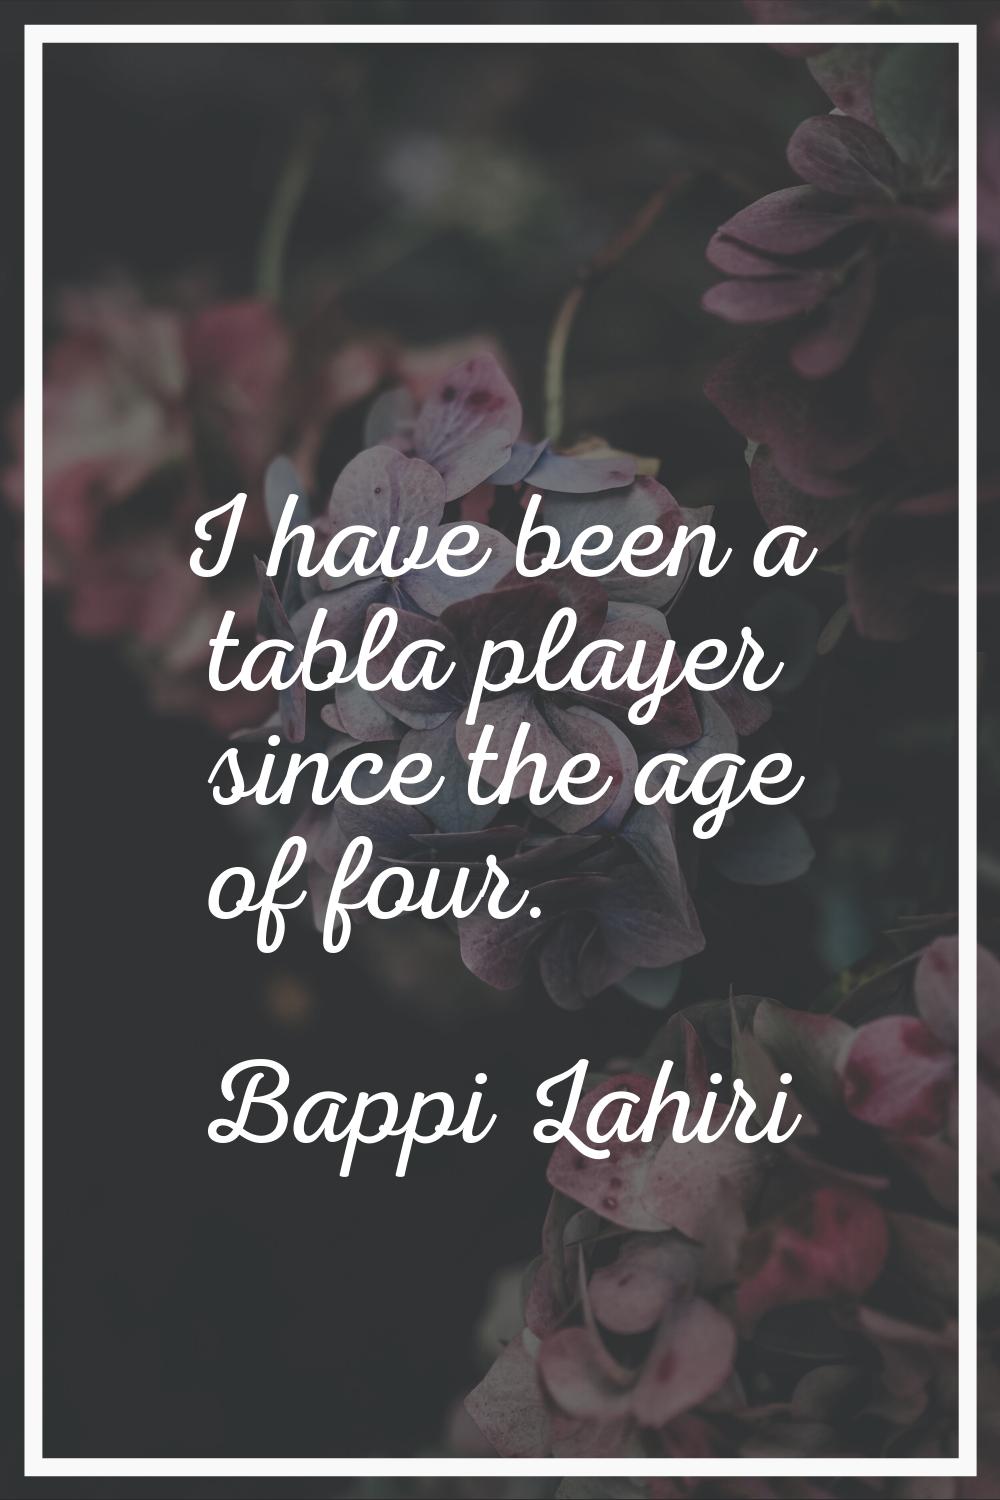 I have been a tabla player since the age of four.